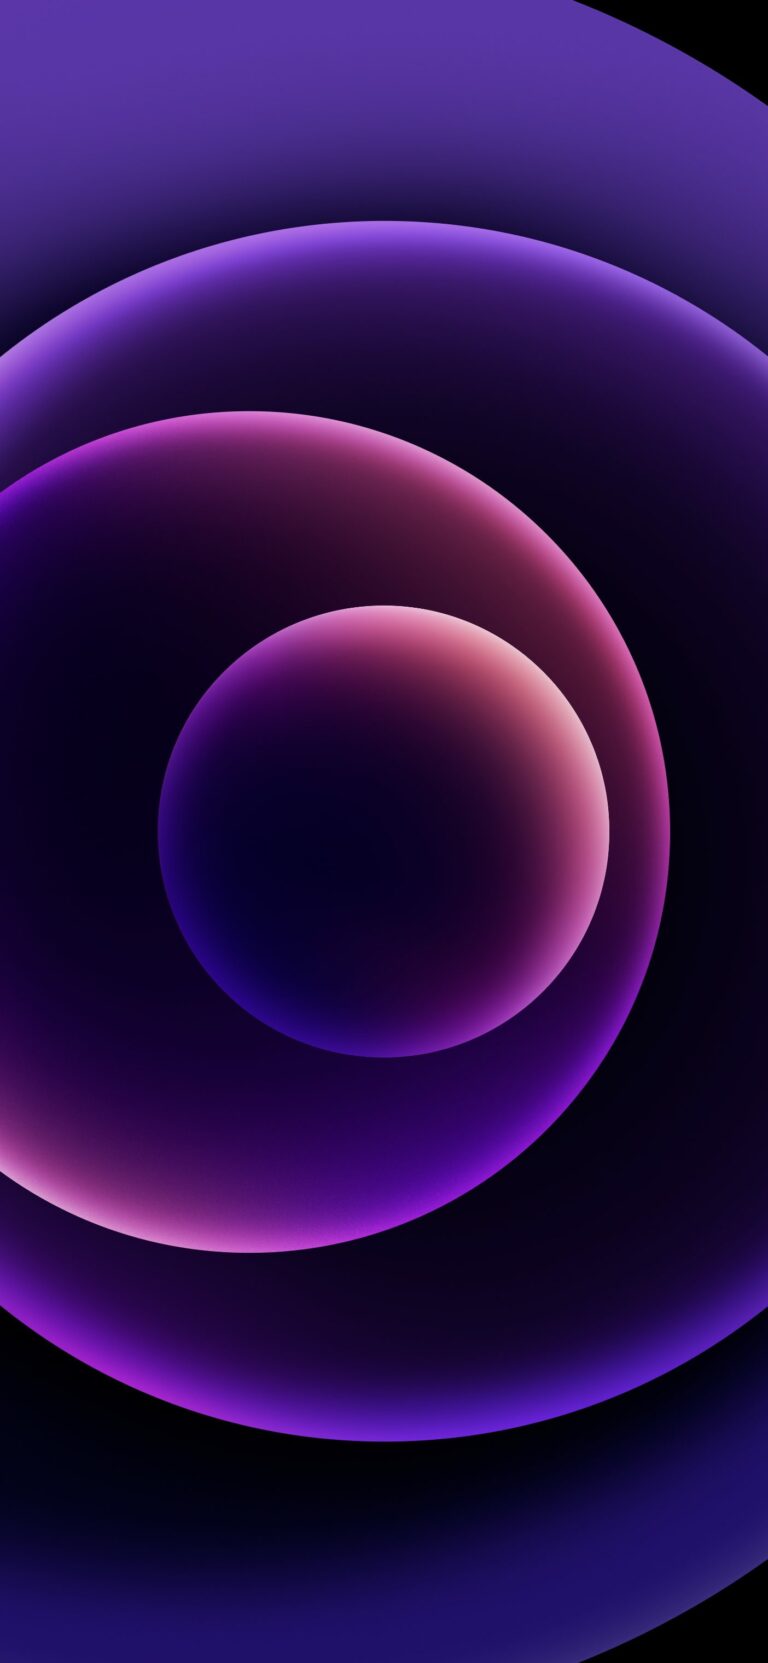 Apple iOS 14.5 RC adds a new purple live wallpaper (Download link inside)